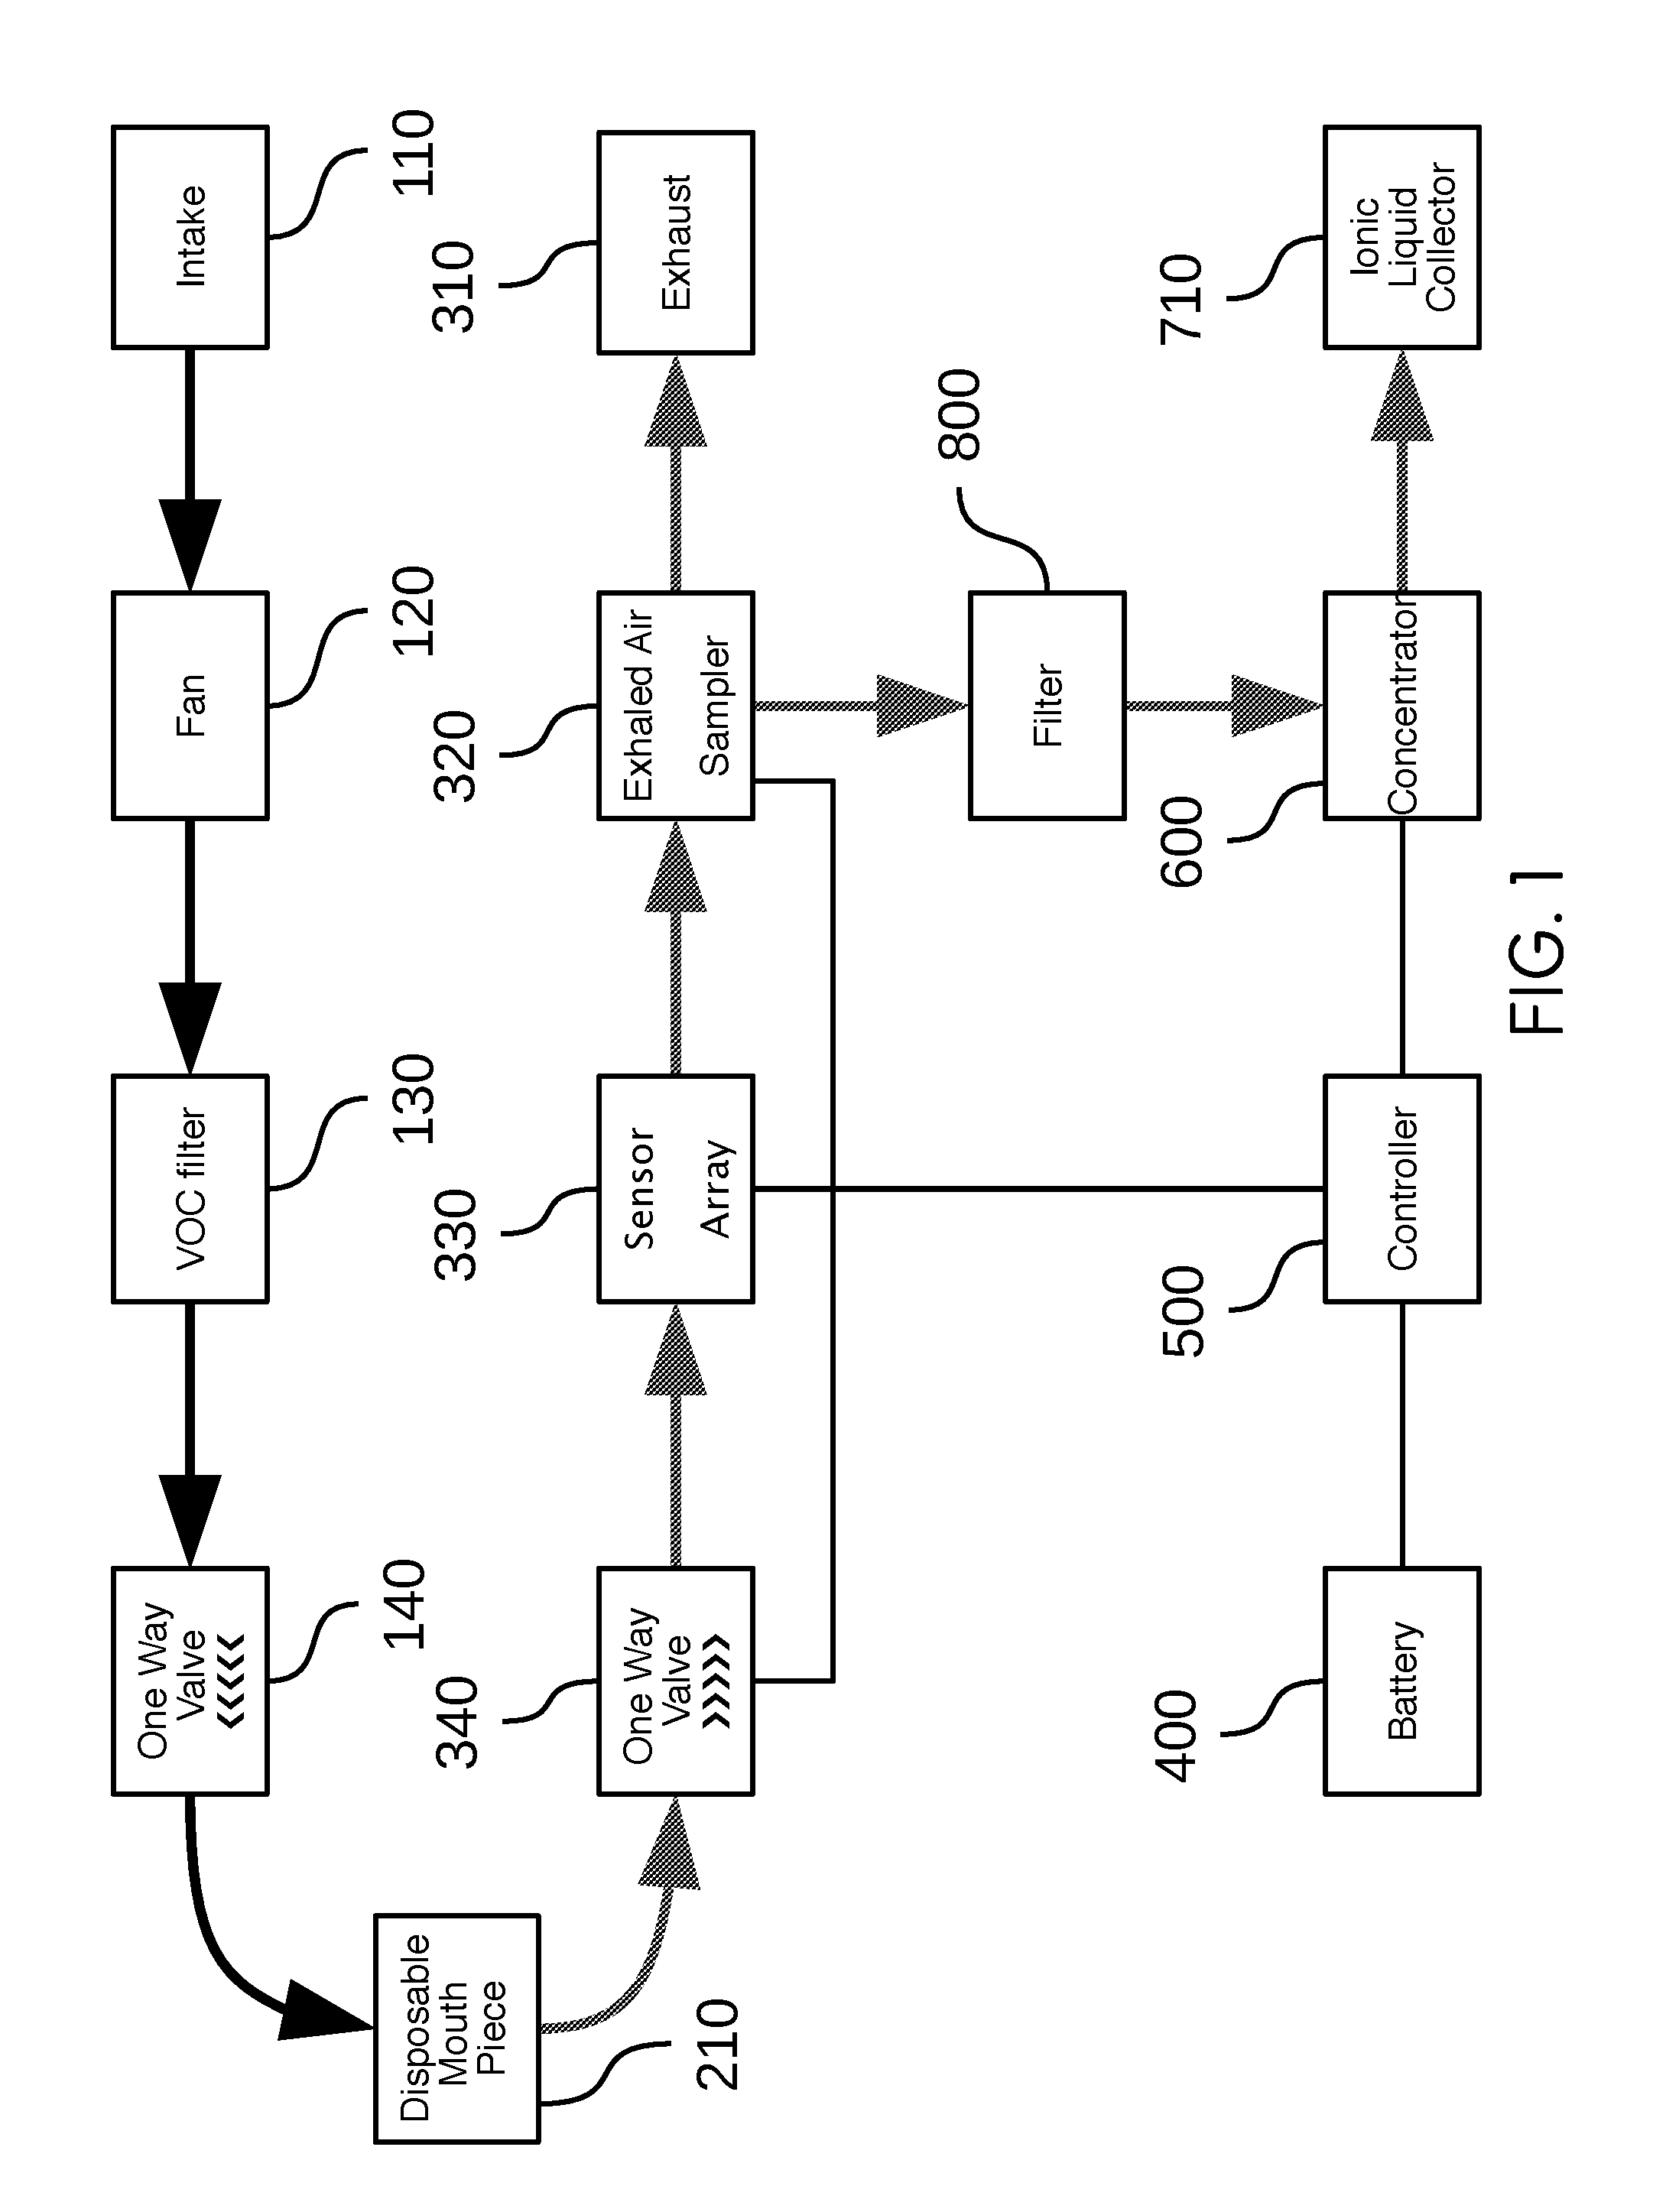 Device for capturing and concentrating volatile organic compounds